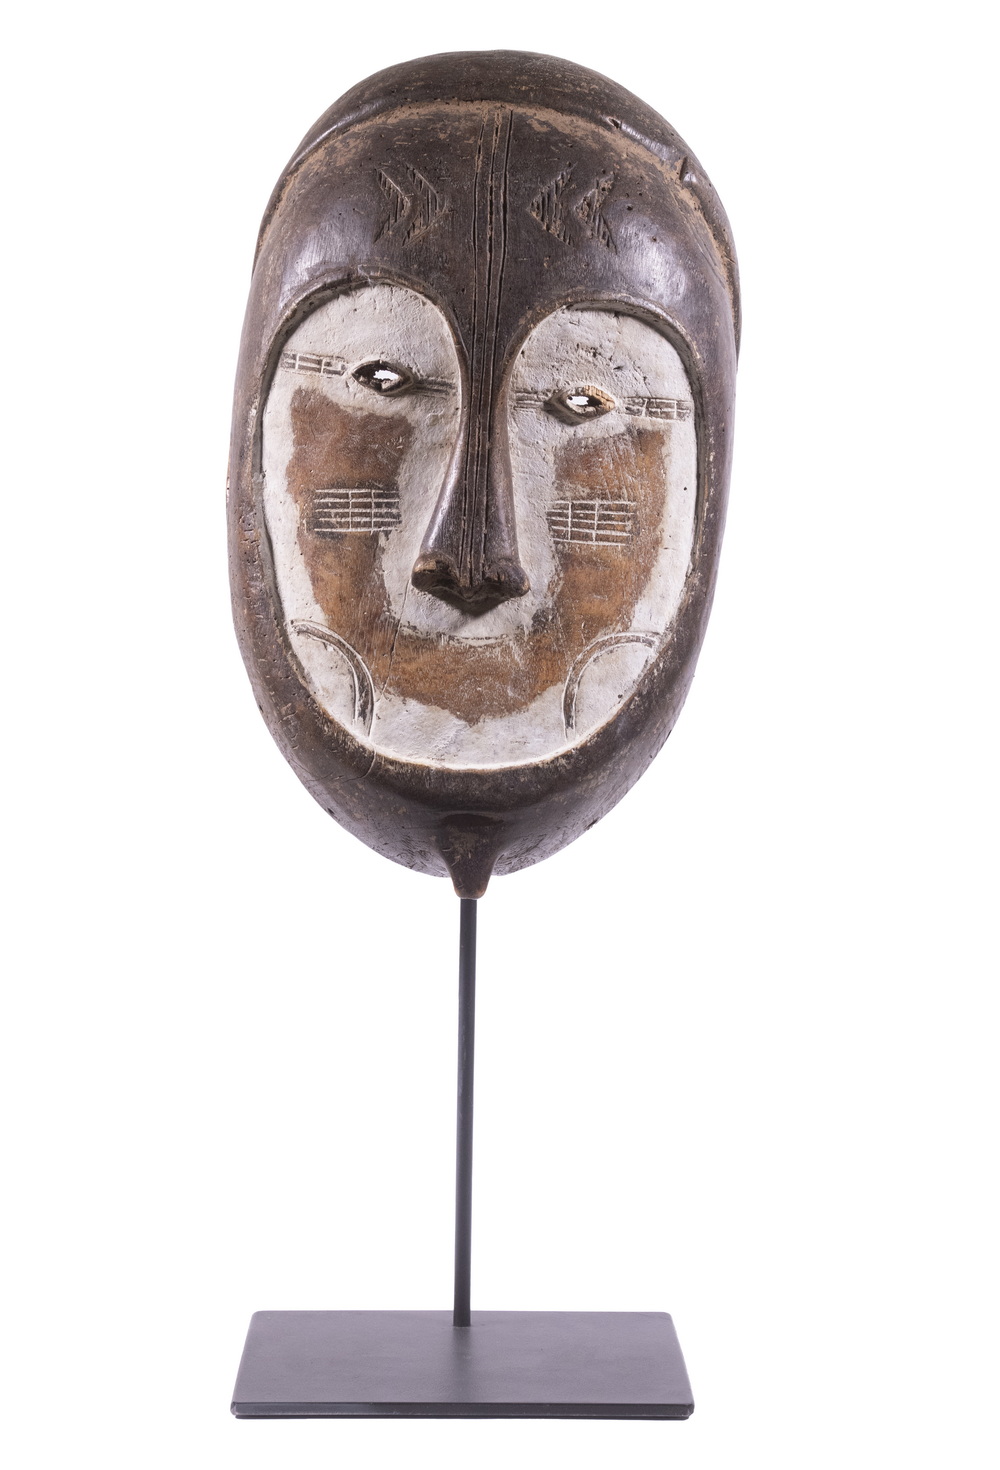 VINTAGE AFRICAN MASK ON STAND Pibud 30c9e1